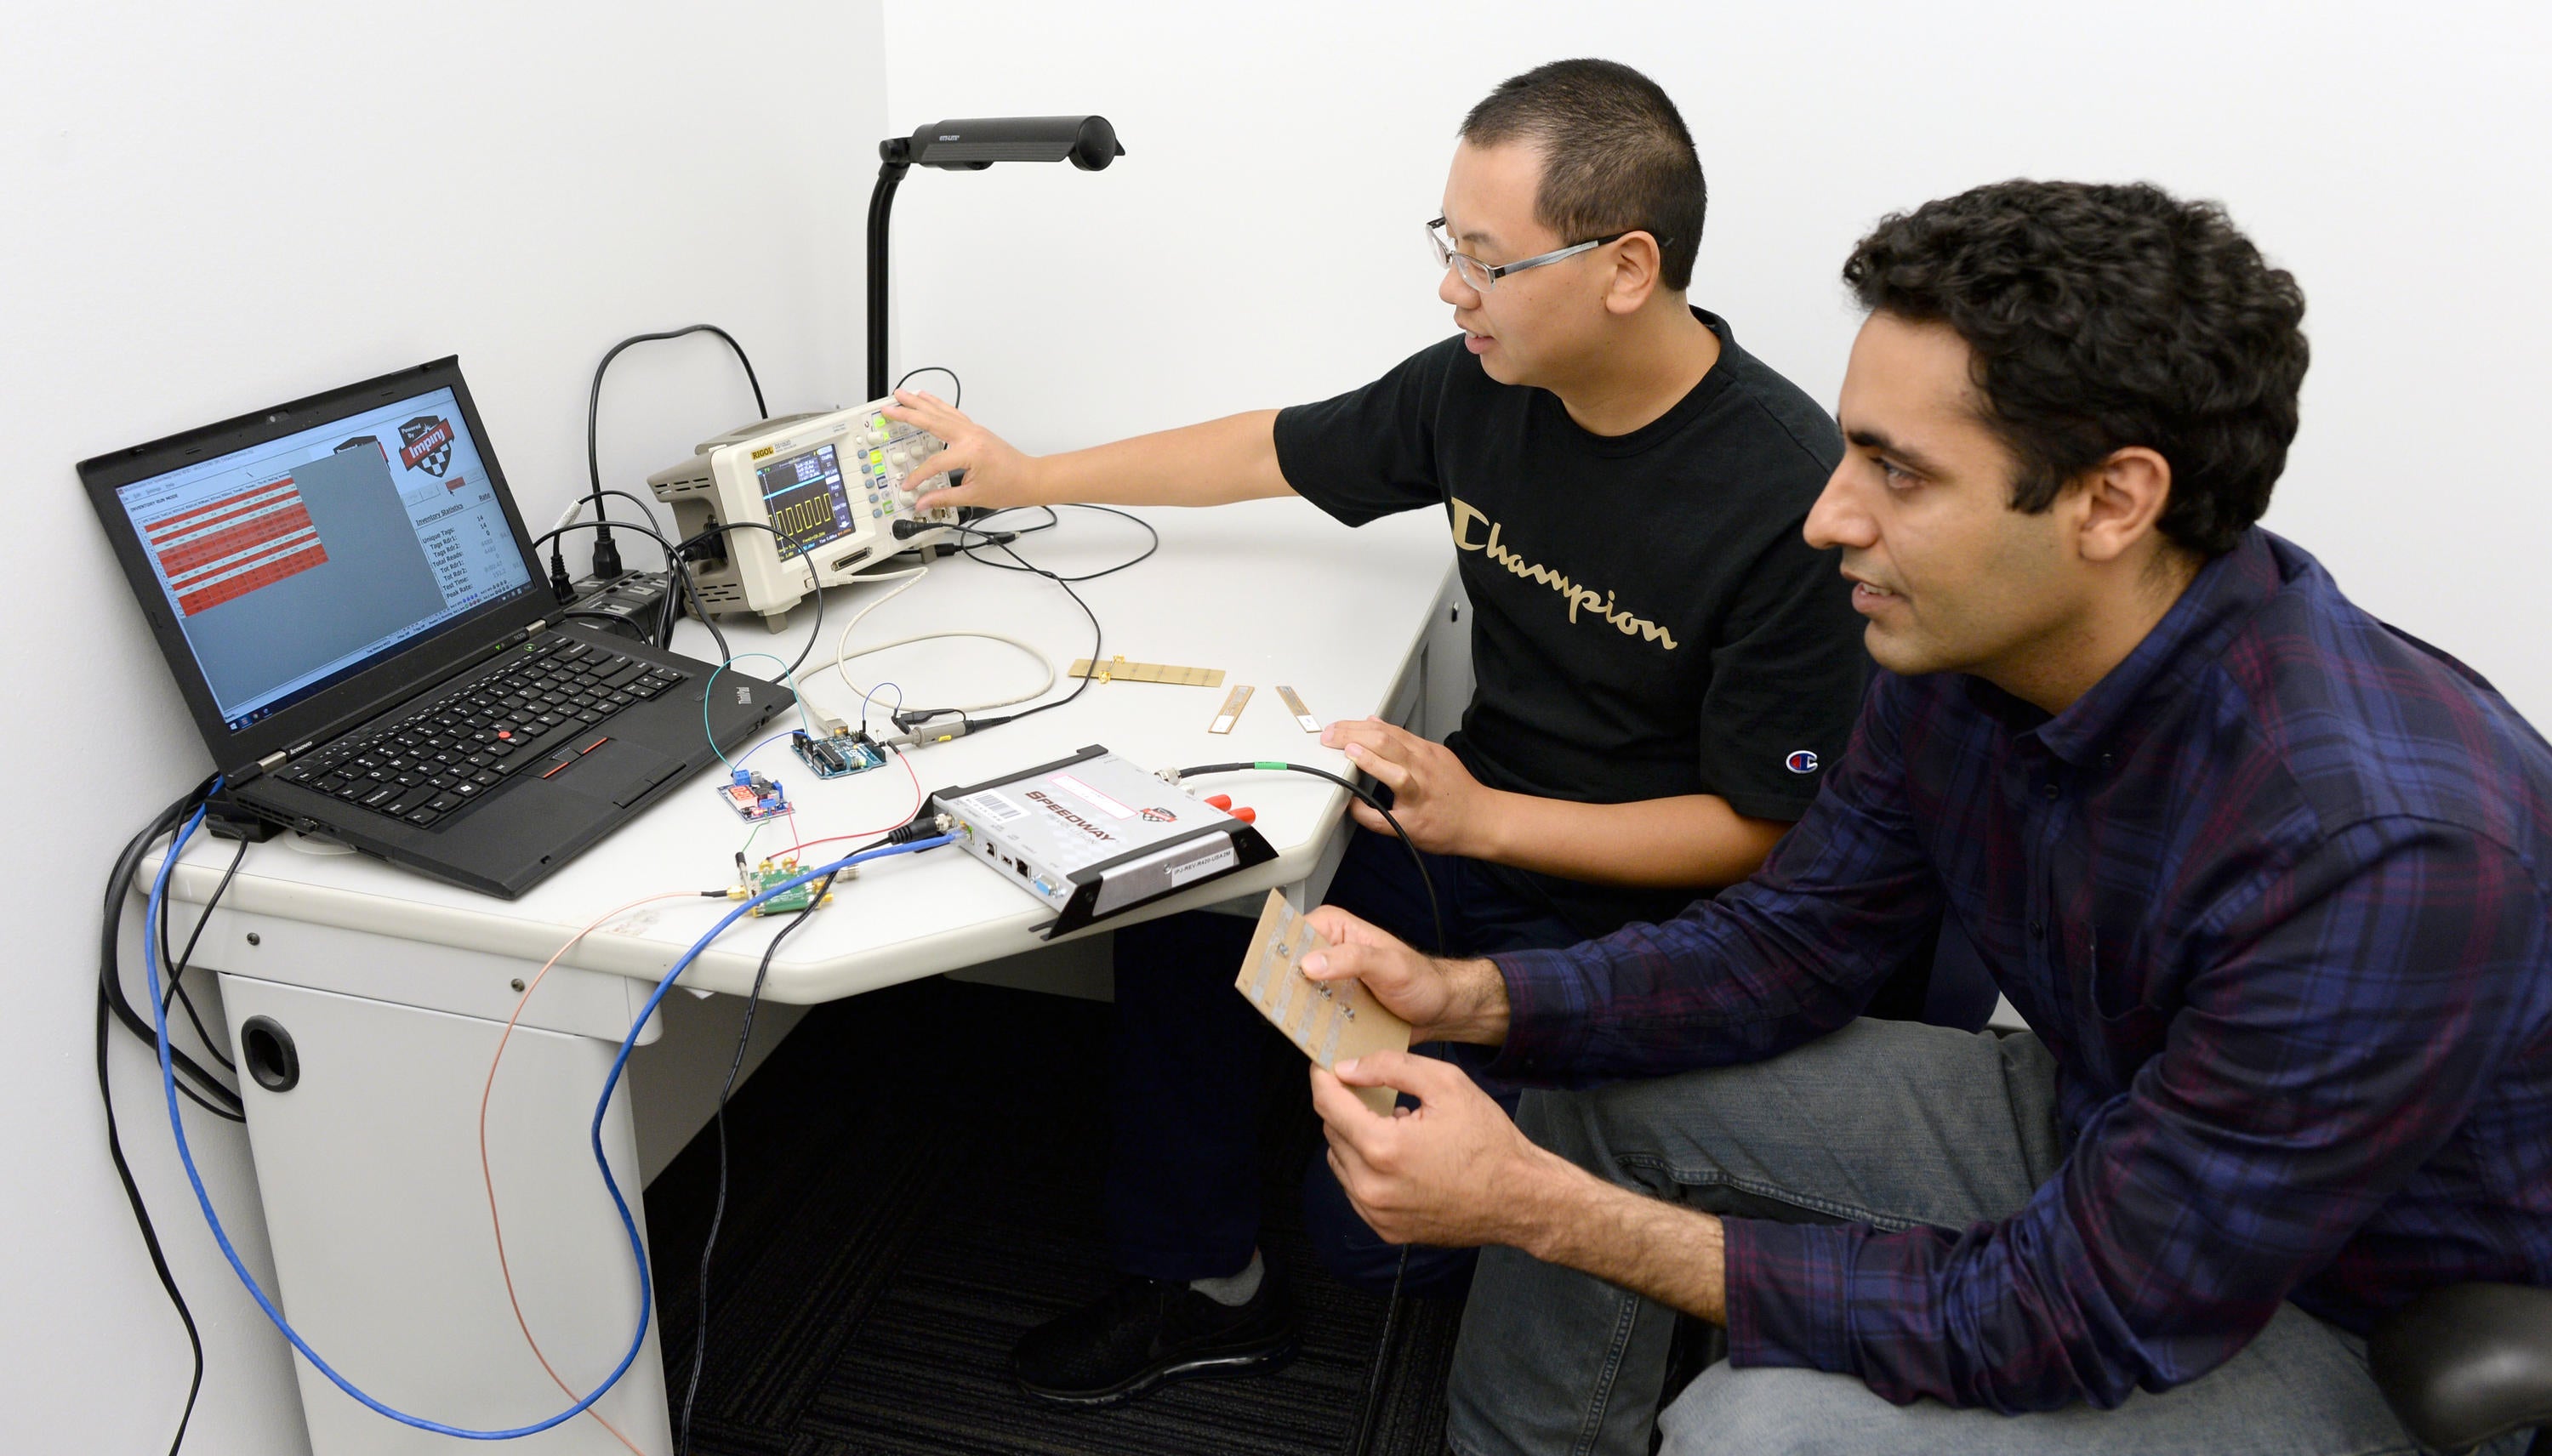 Ju Wang and Omid Abari demonstrate their device at a computer.